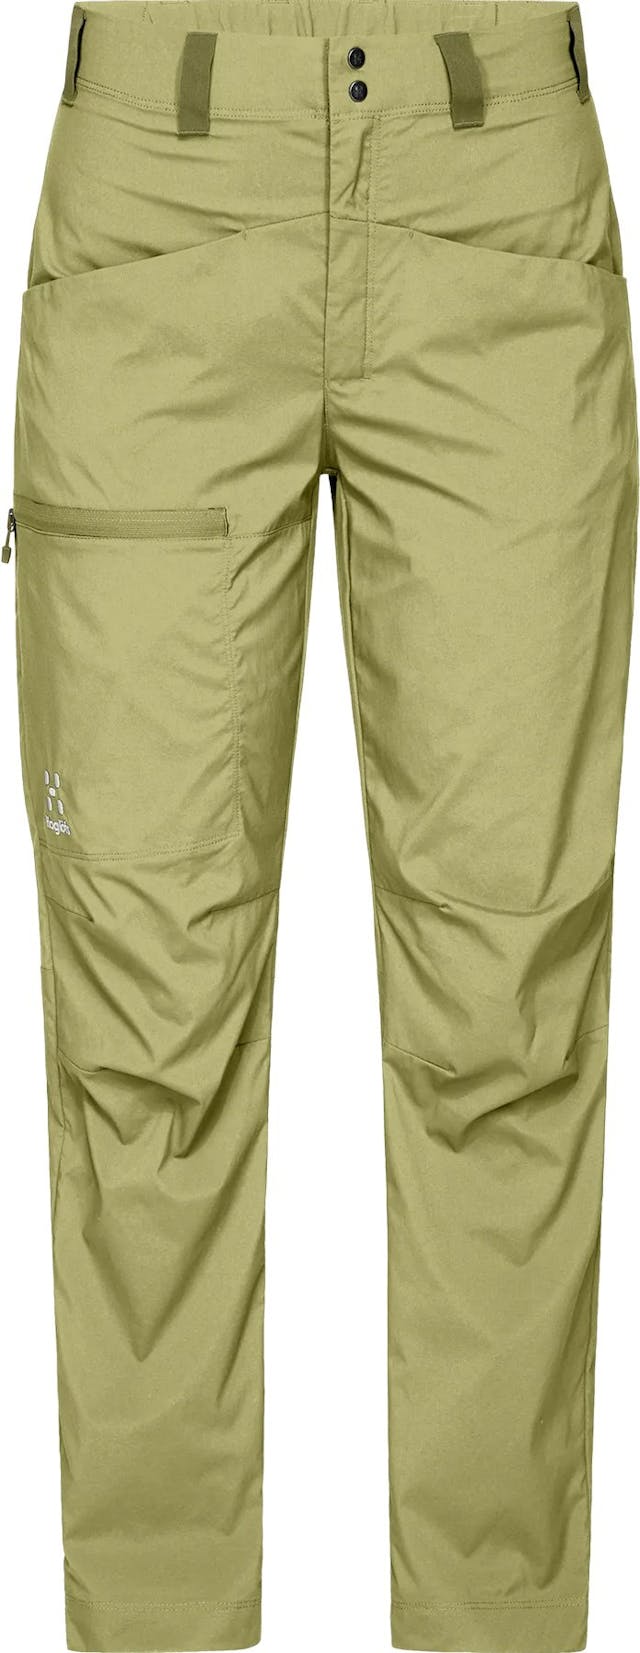 Product image for Lite Relaxed Pant - Women's